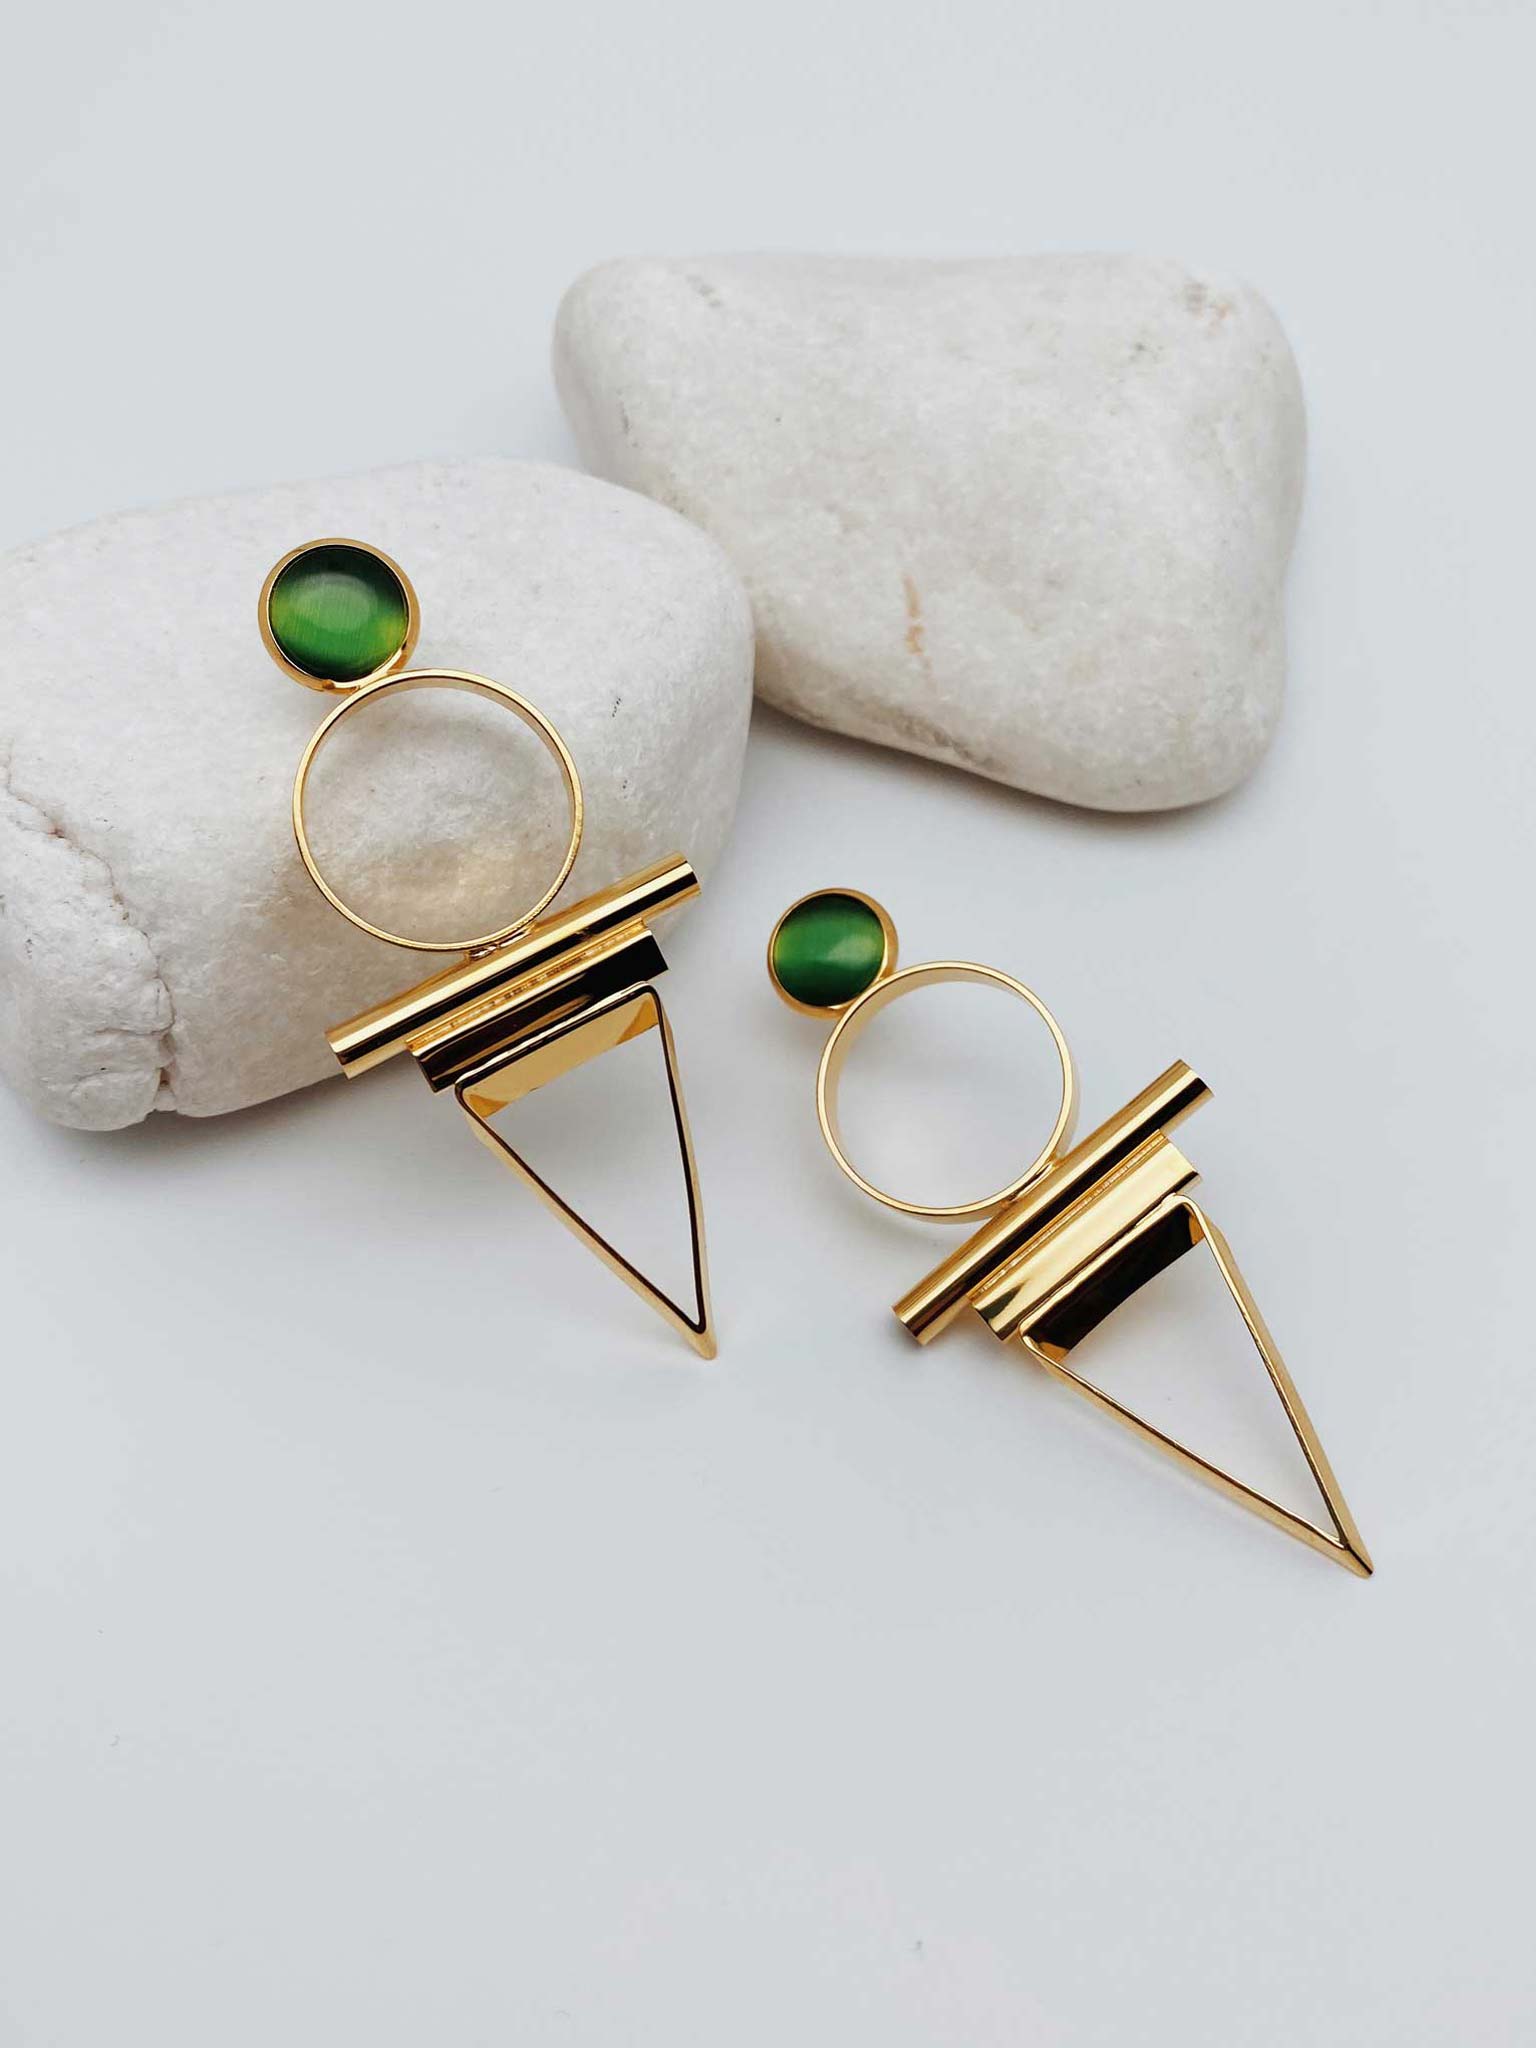 Earrings Brian Gold on stone